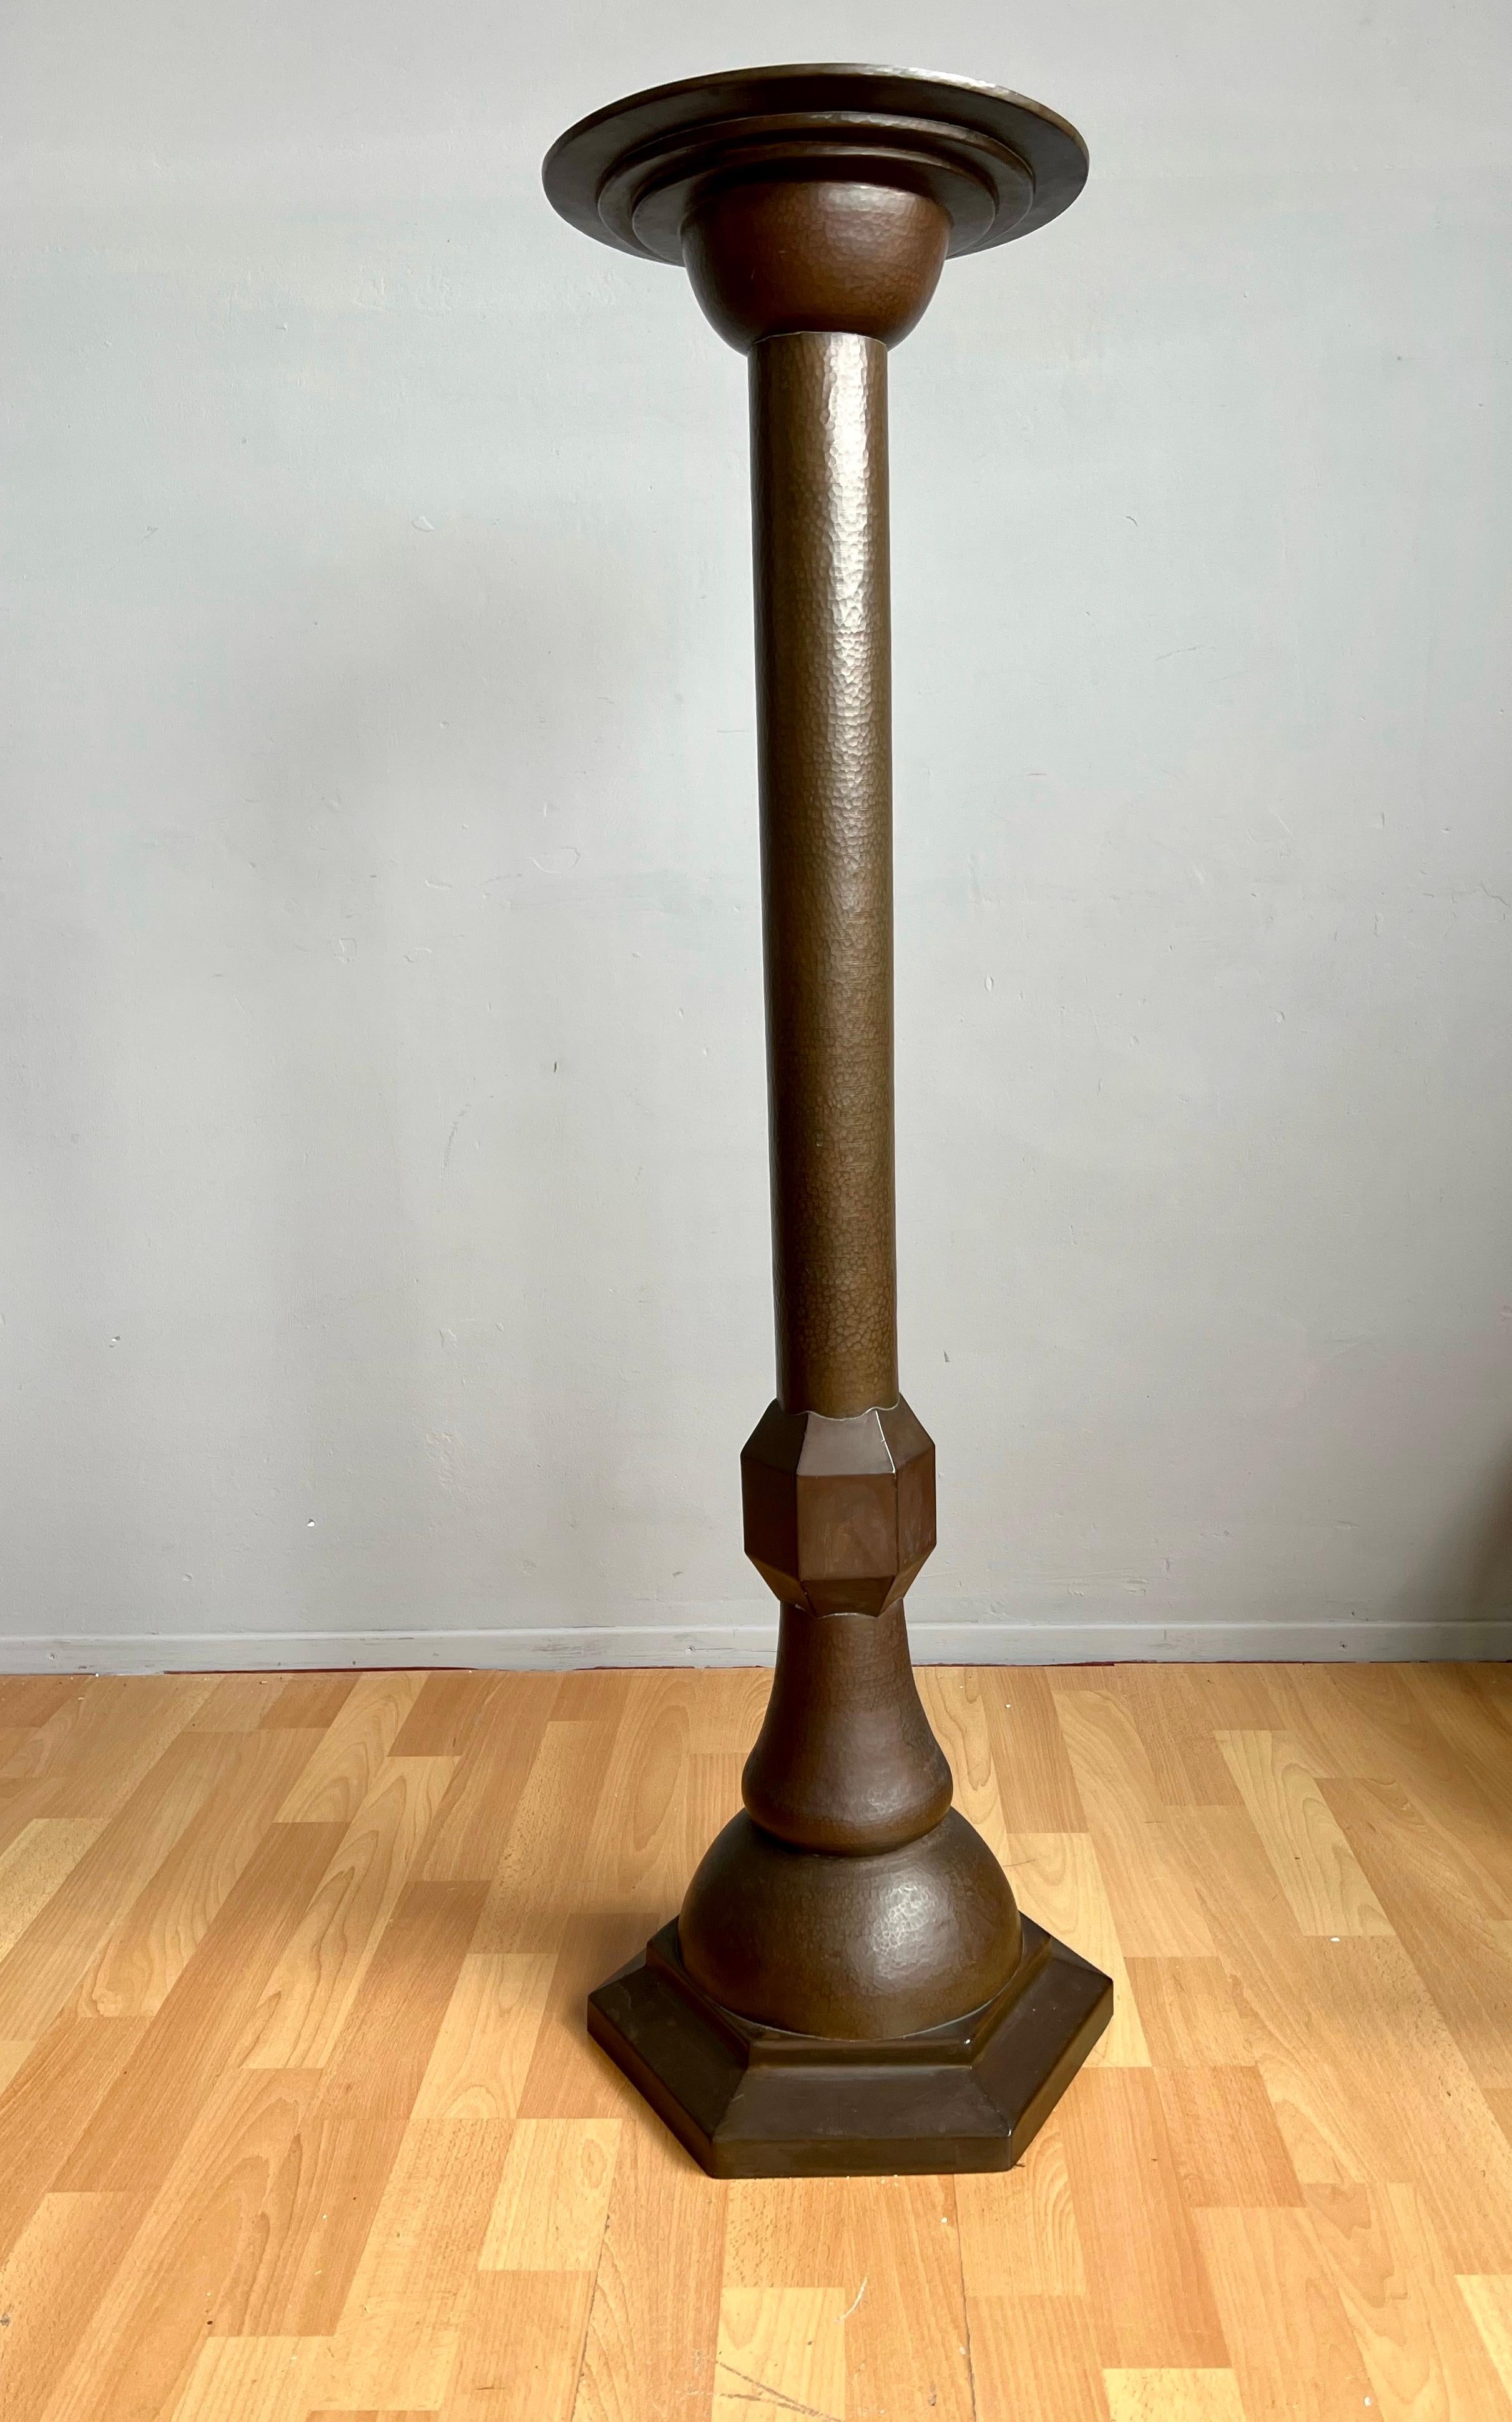 Wonderful early 20th century craftsmanship pedestal.

Finding the most beautiful and rarest antiques in the best possible condition is what we always dream of and we have been very fortunate to have had many dreams come true. When you look at this